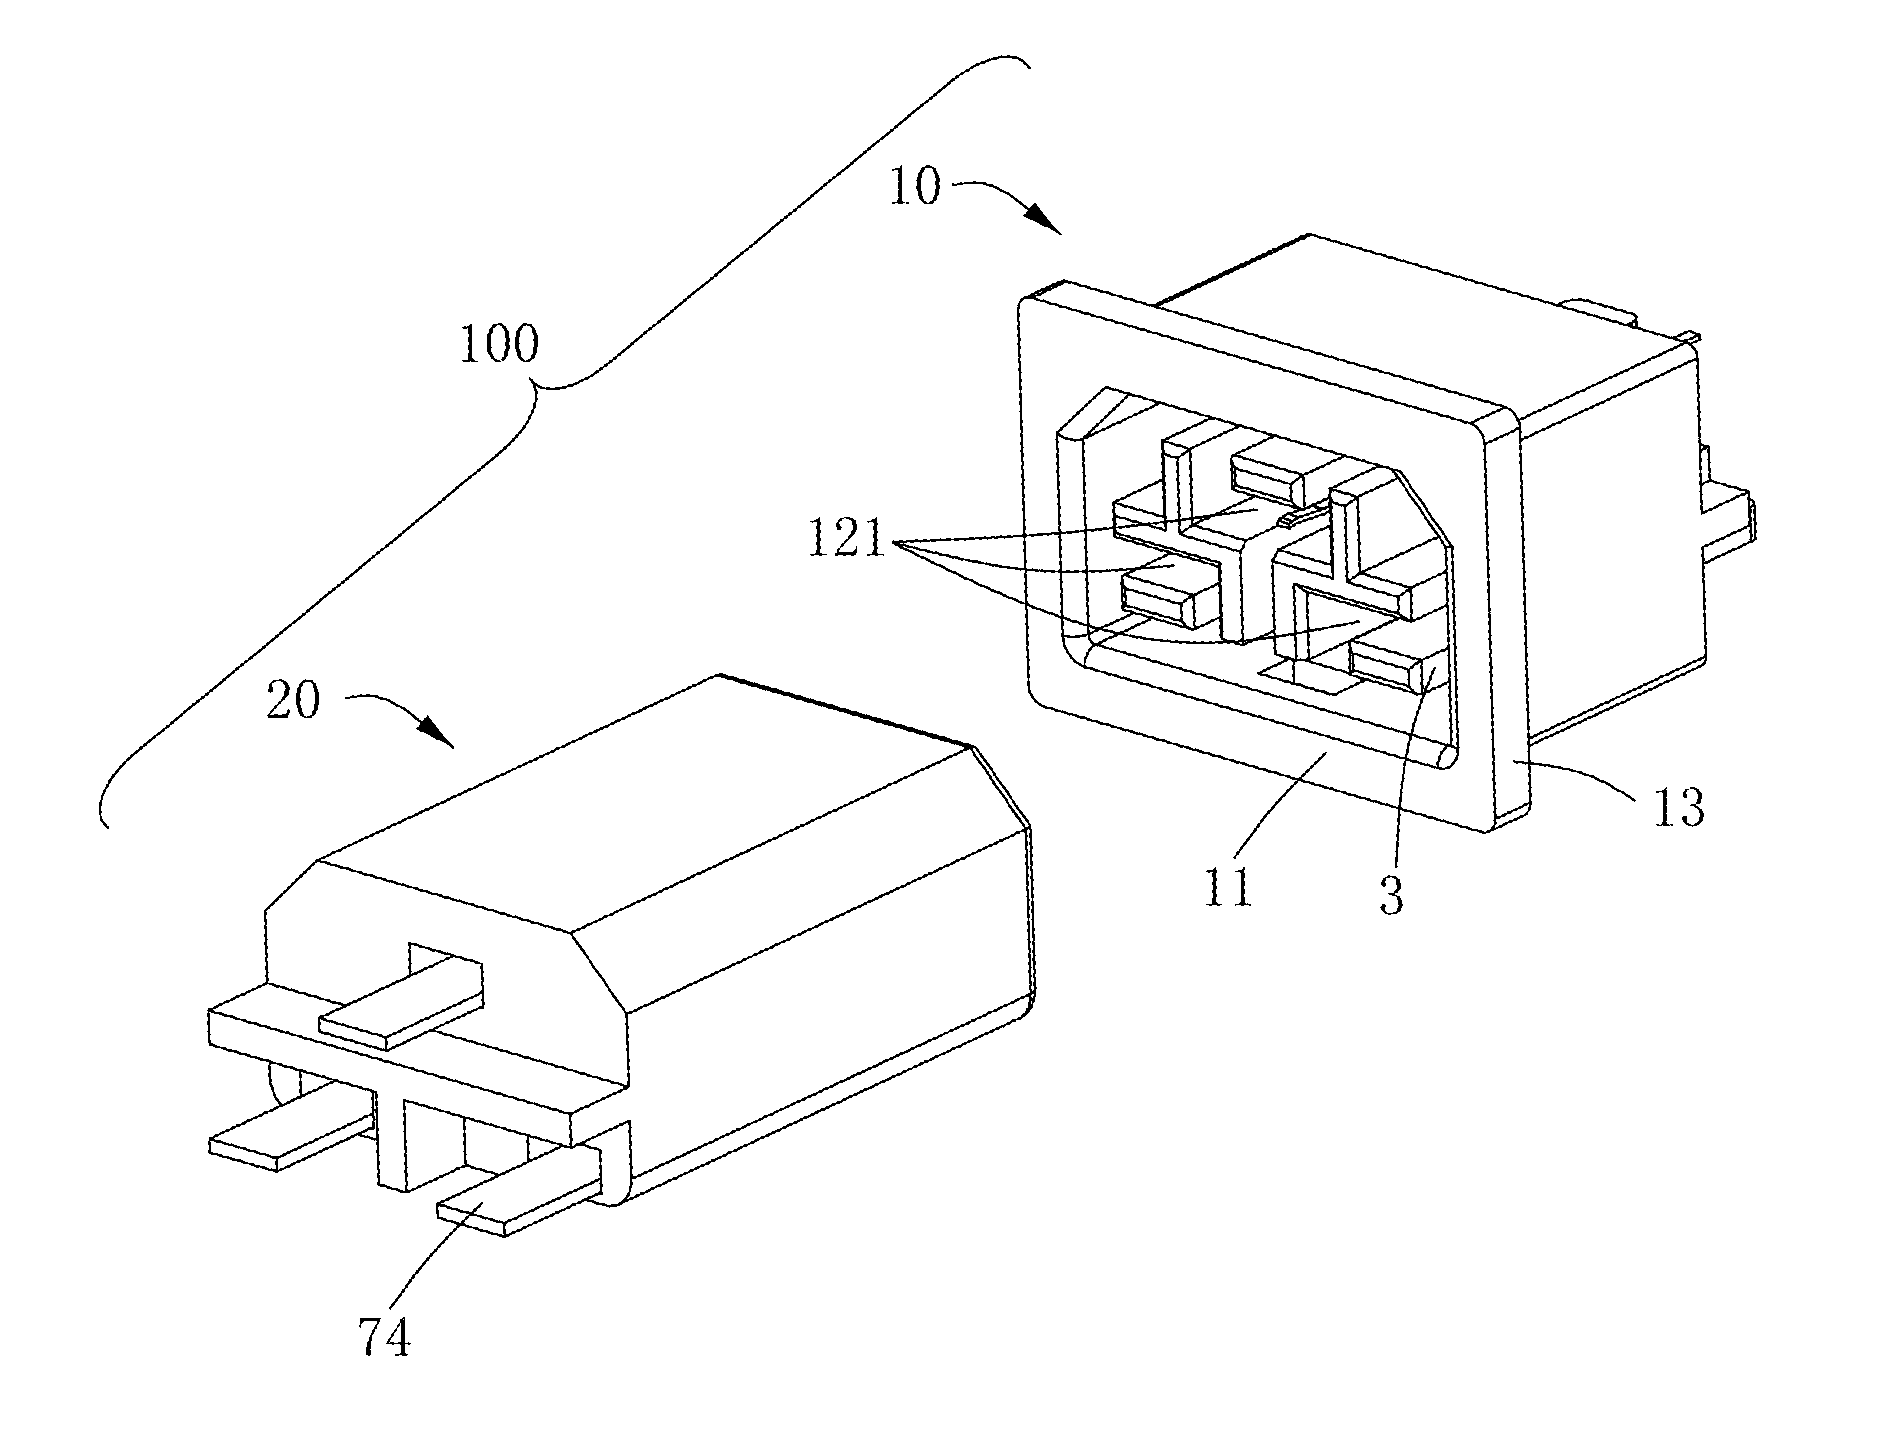 Electrical connector with touch-safety contact structures